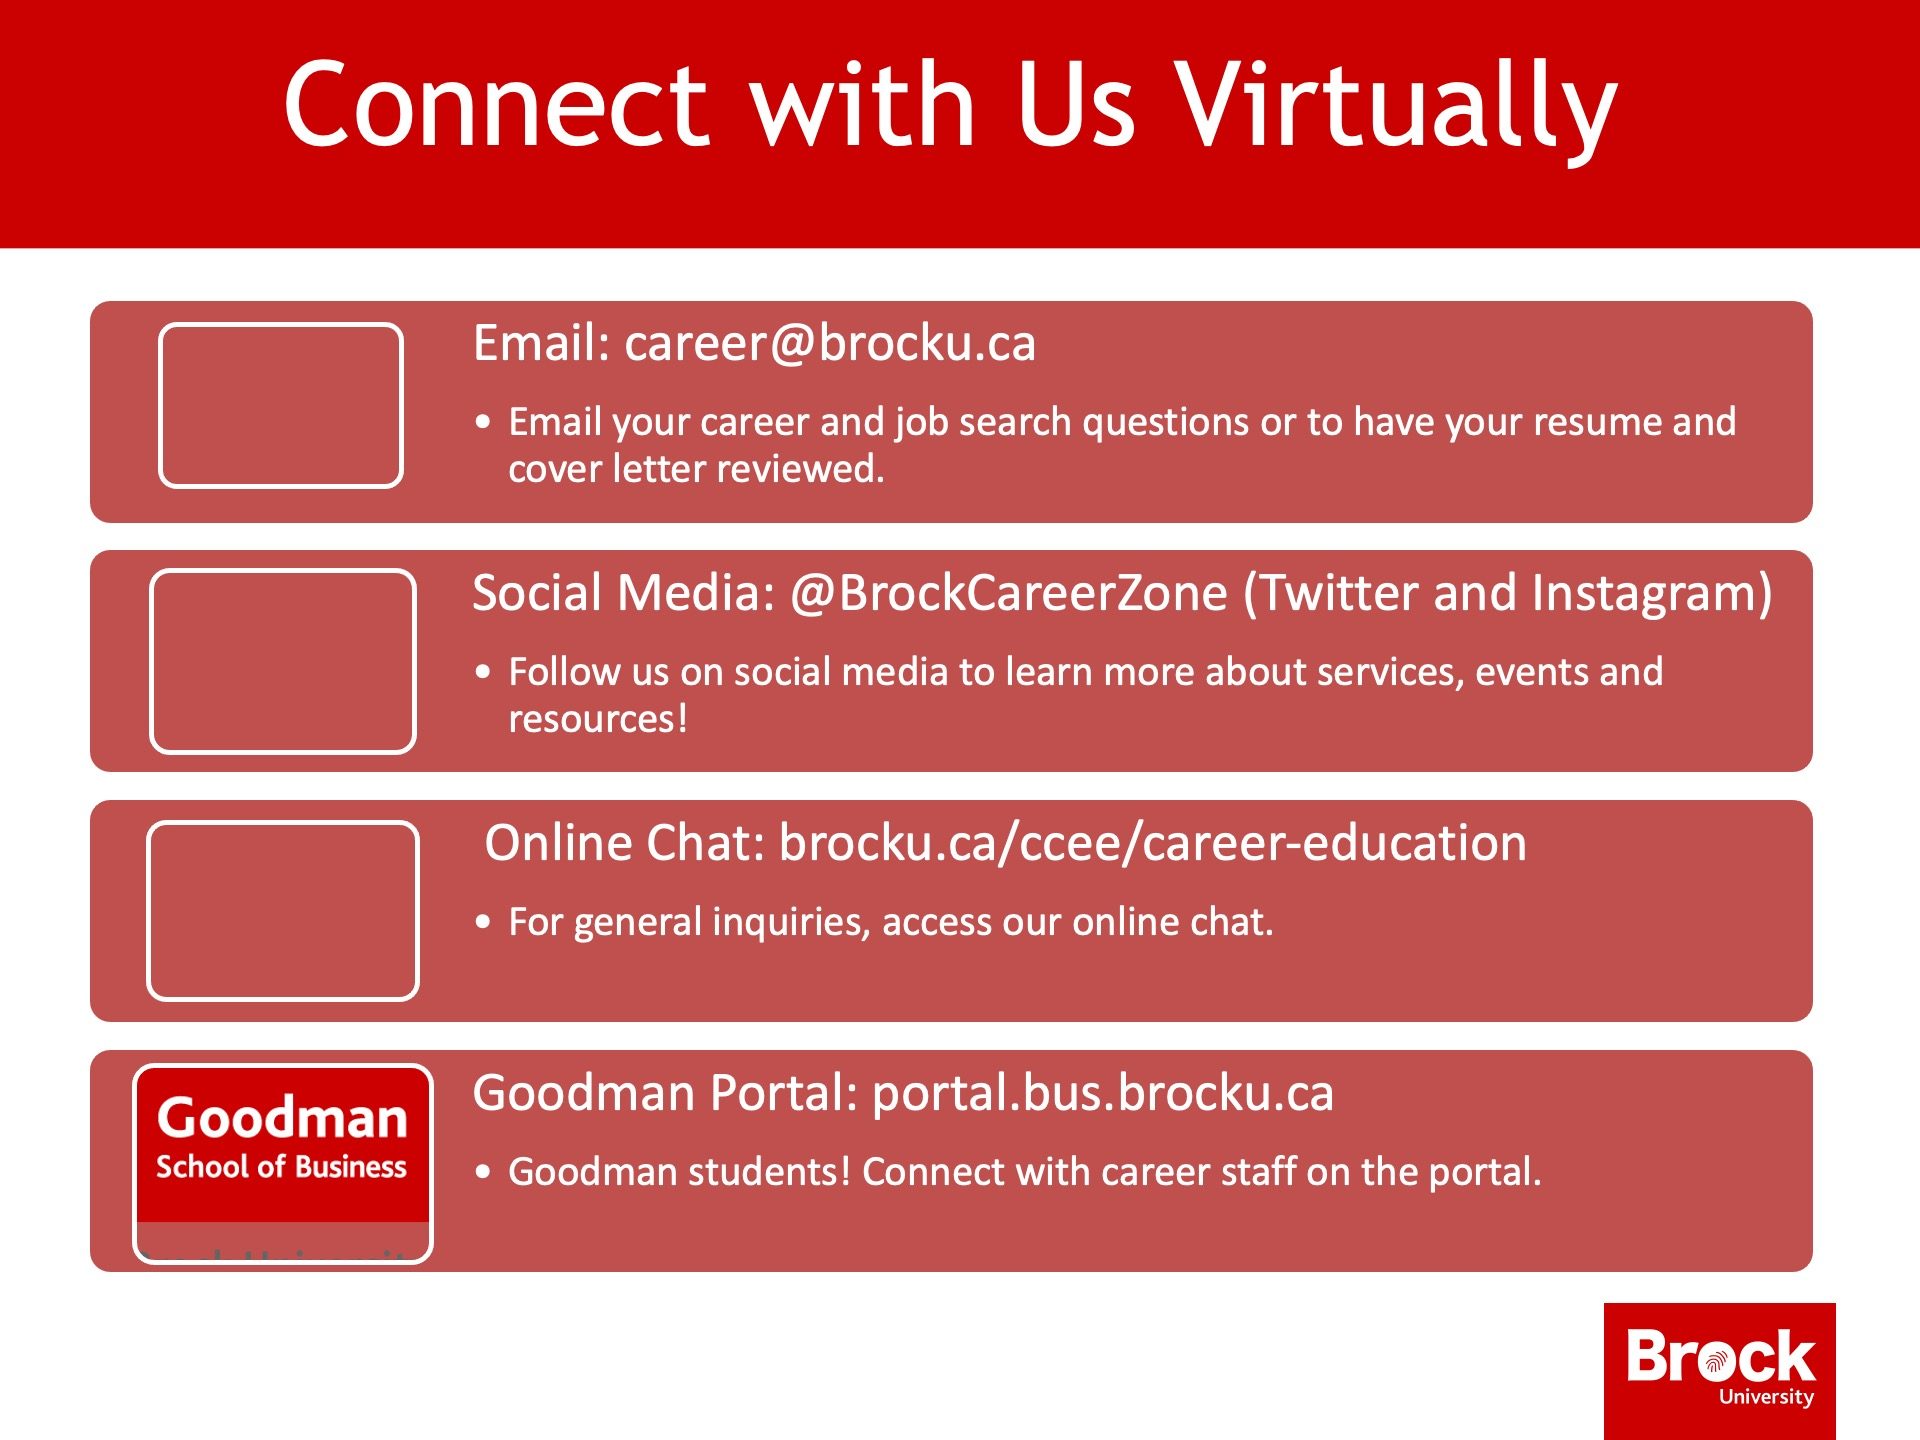 Connect with CareerZone virtually